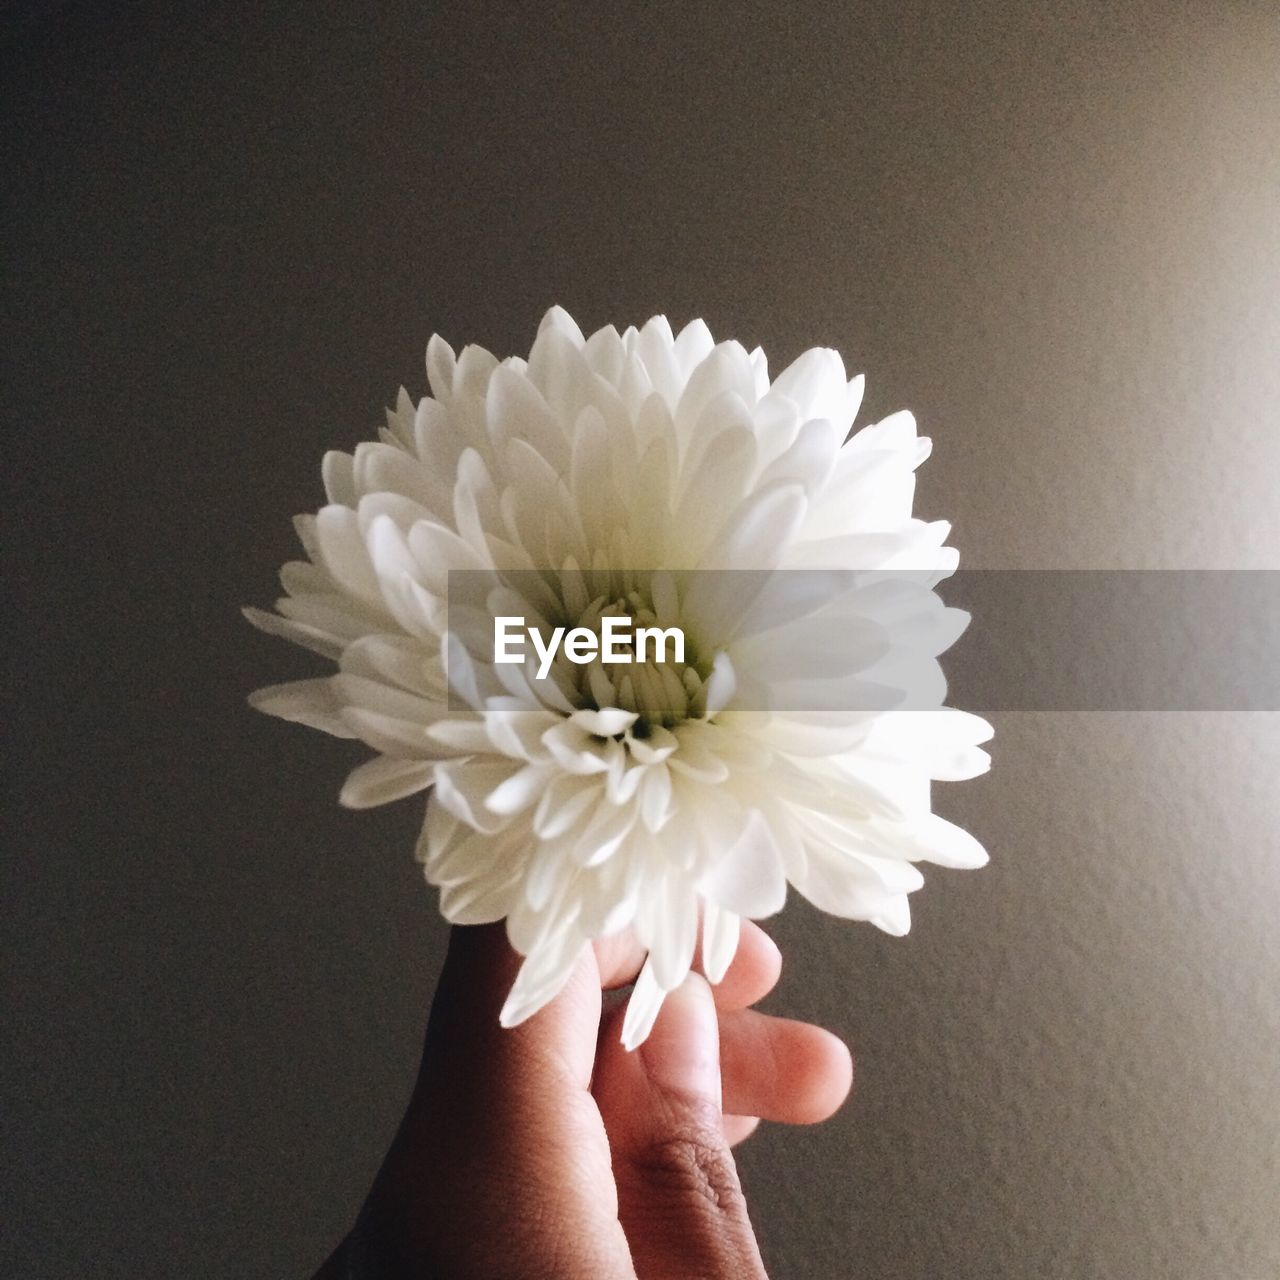 Cropped image of hand holding white flower against wall